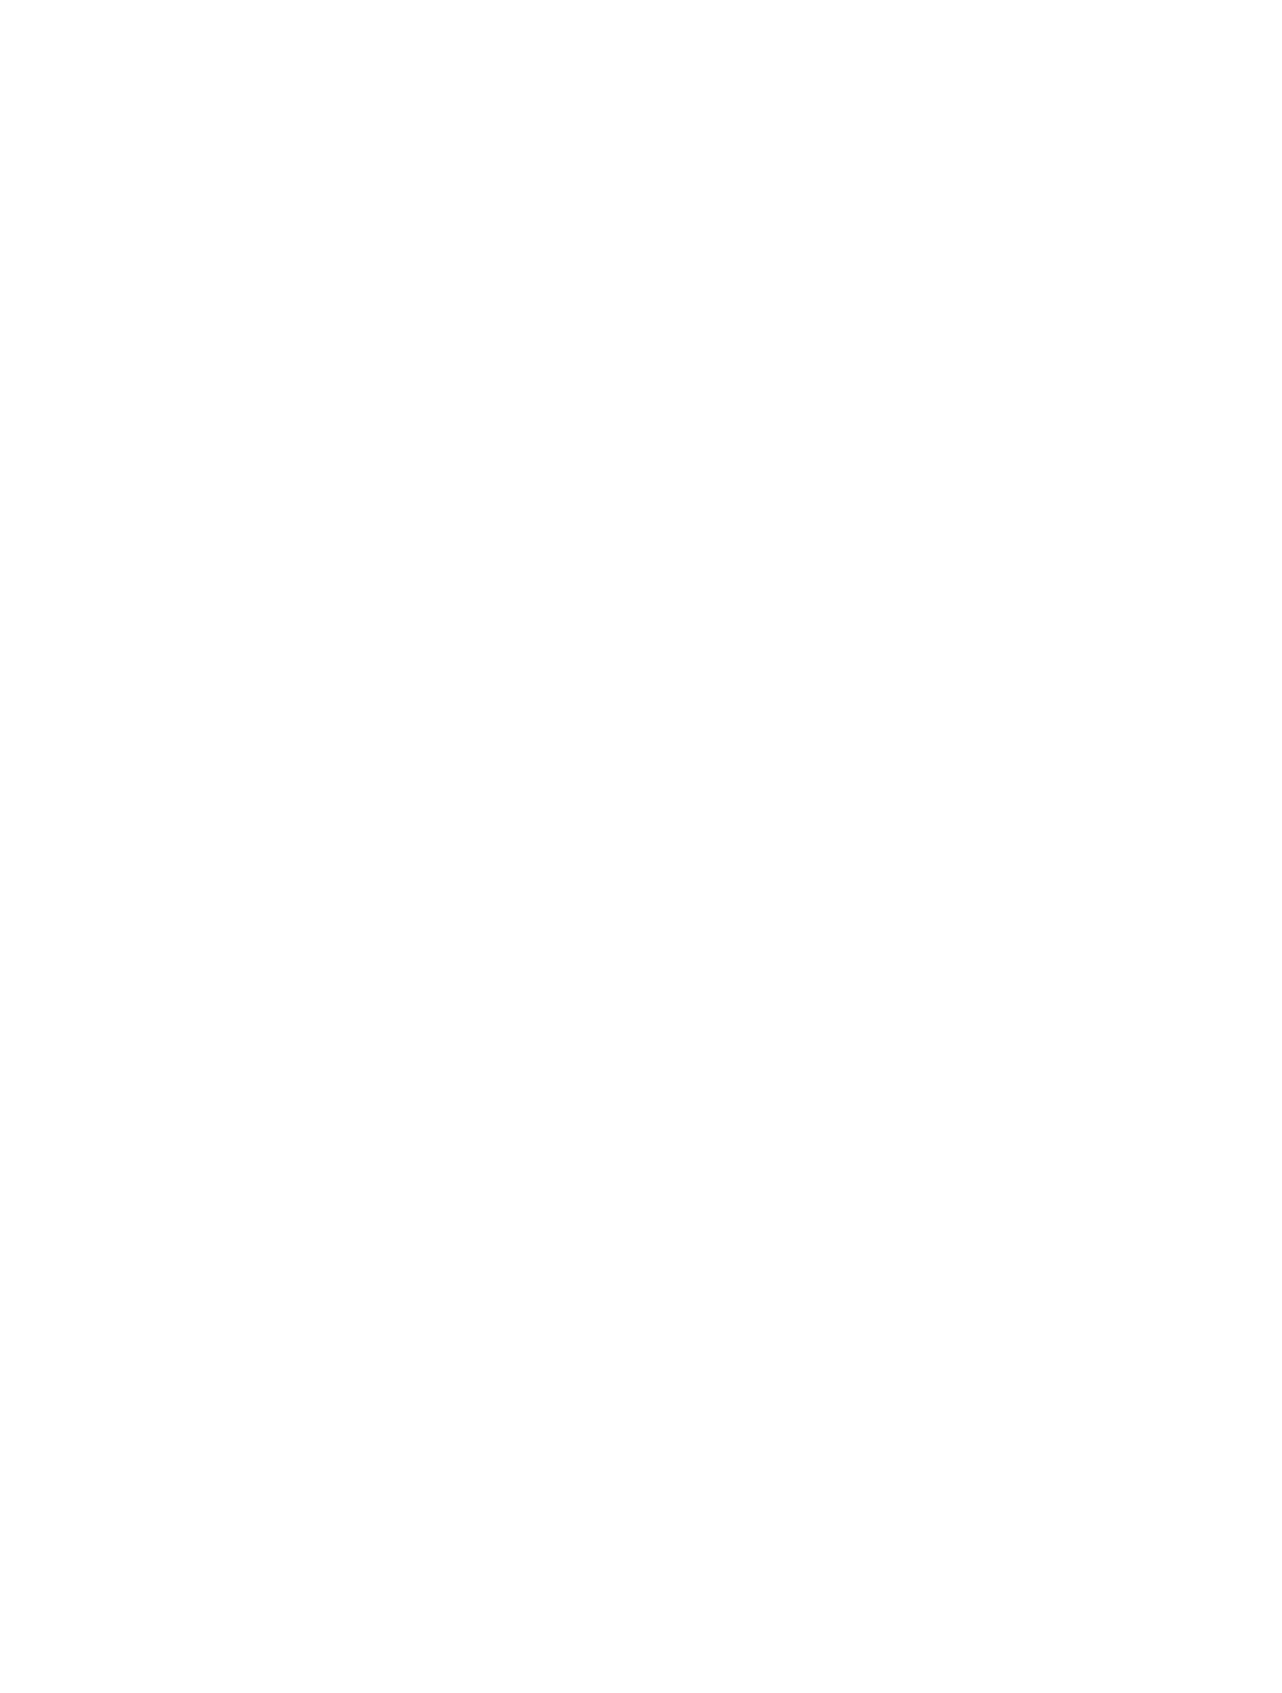 Office of Arts & Culture